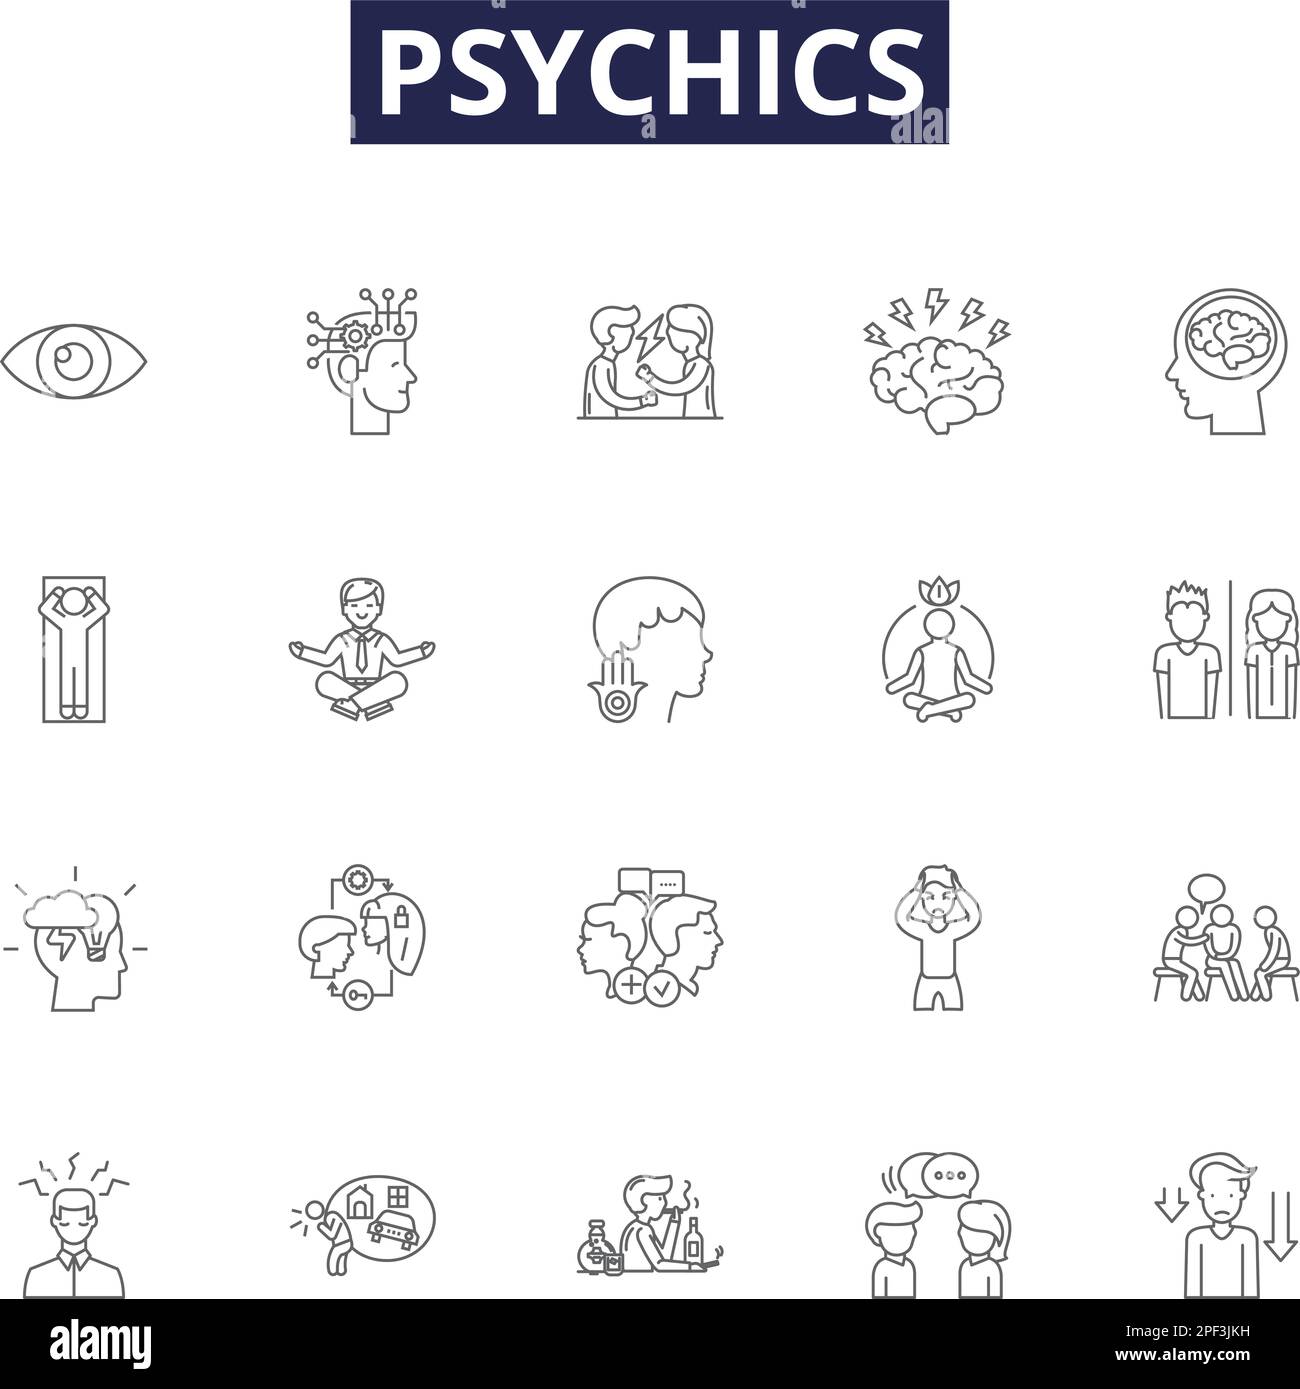 Psychics line vector icons and signs. Clairvoyants, Mediums, Fortune-tellers, Seers, Diviners, Crystal-gazers, Haruspexes, Mystics outline vector Stock Vector